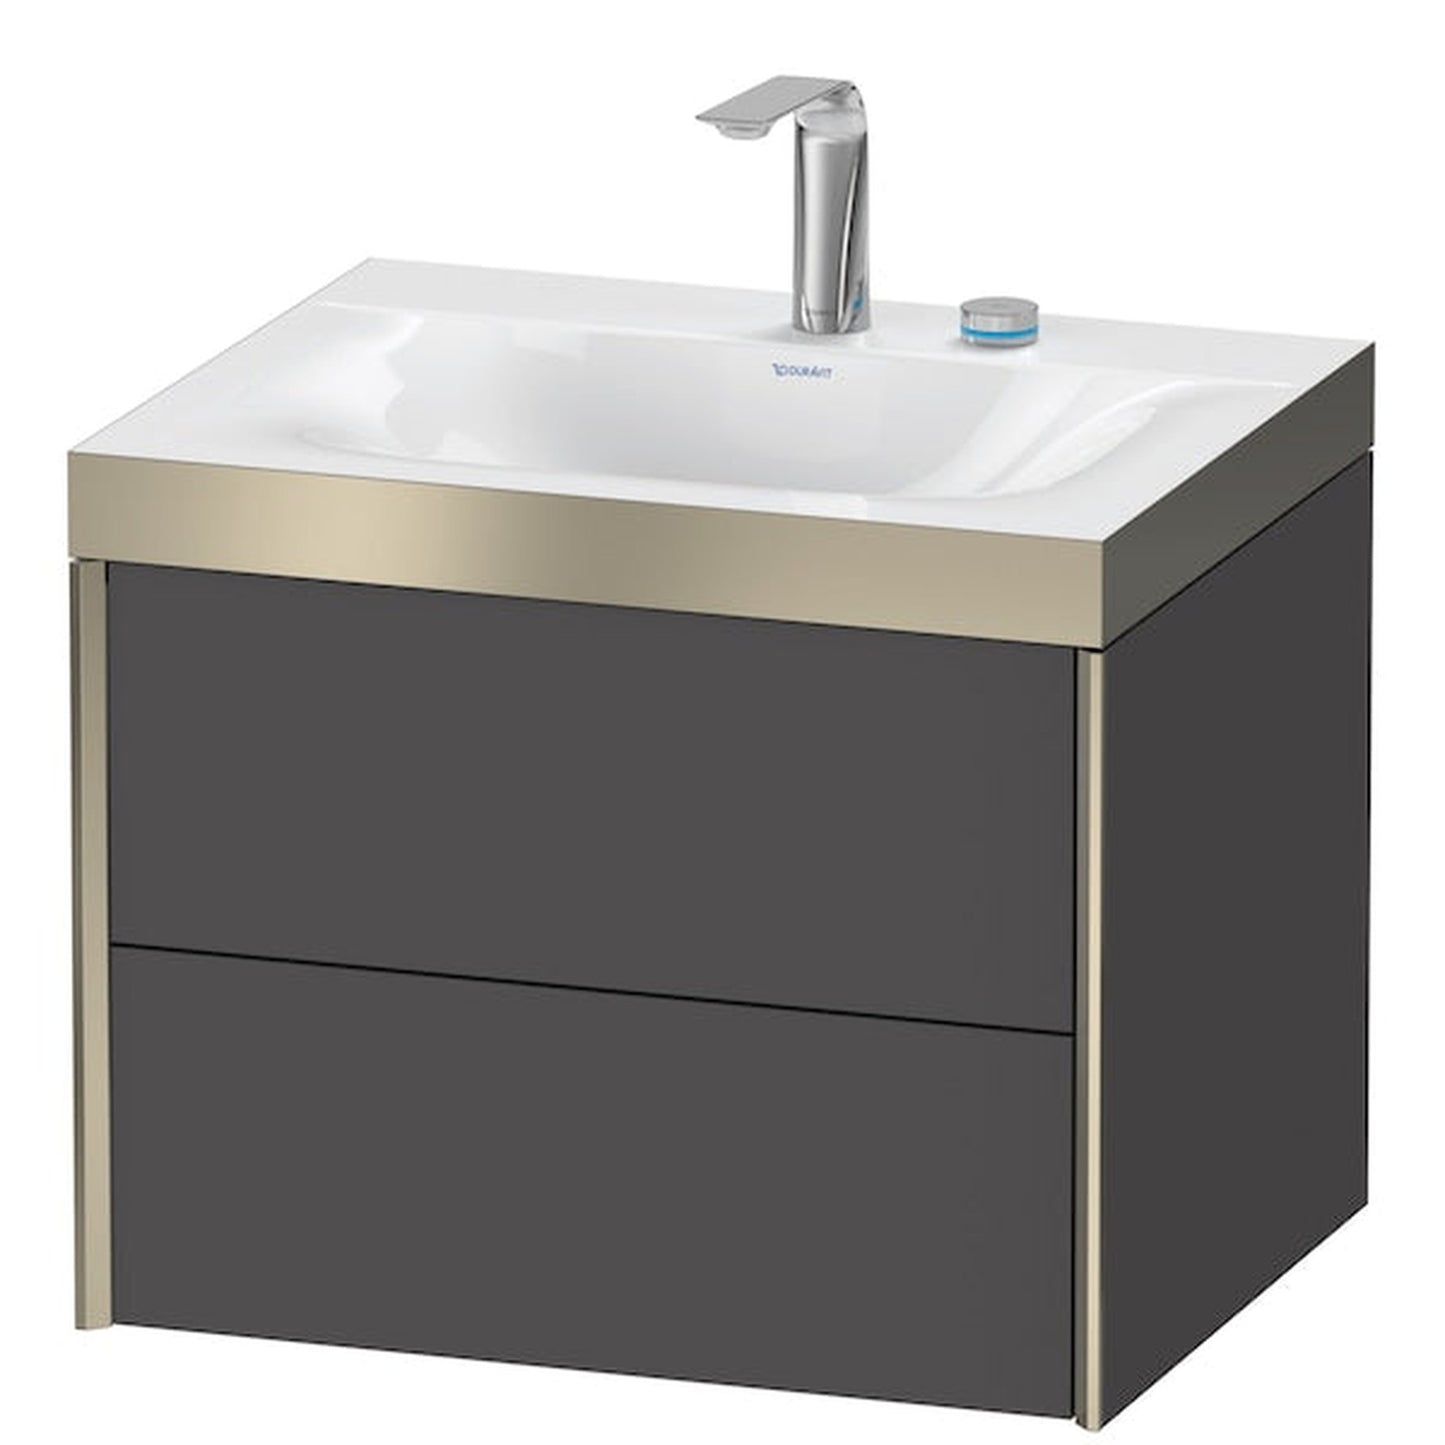 Duravit Xviu 24" x 20" x 19" Two Drawer C-Bonded Wall-Mount Vanity Kit With Two Tap Holes, Graphite (XV4614EB149P)